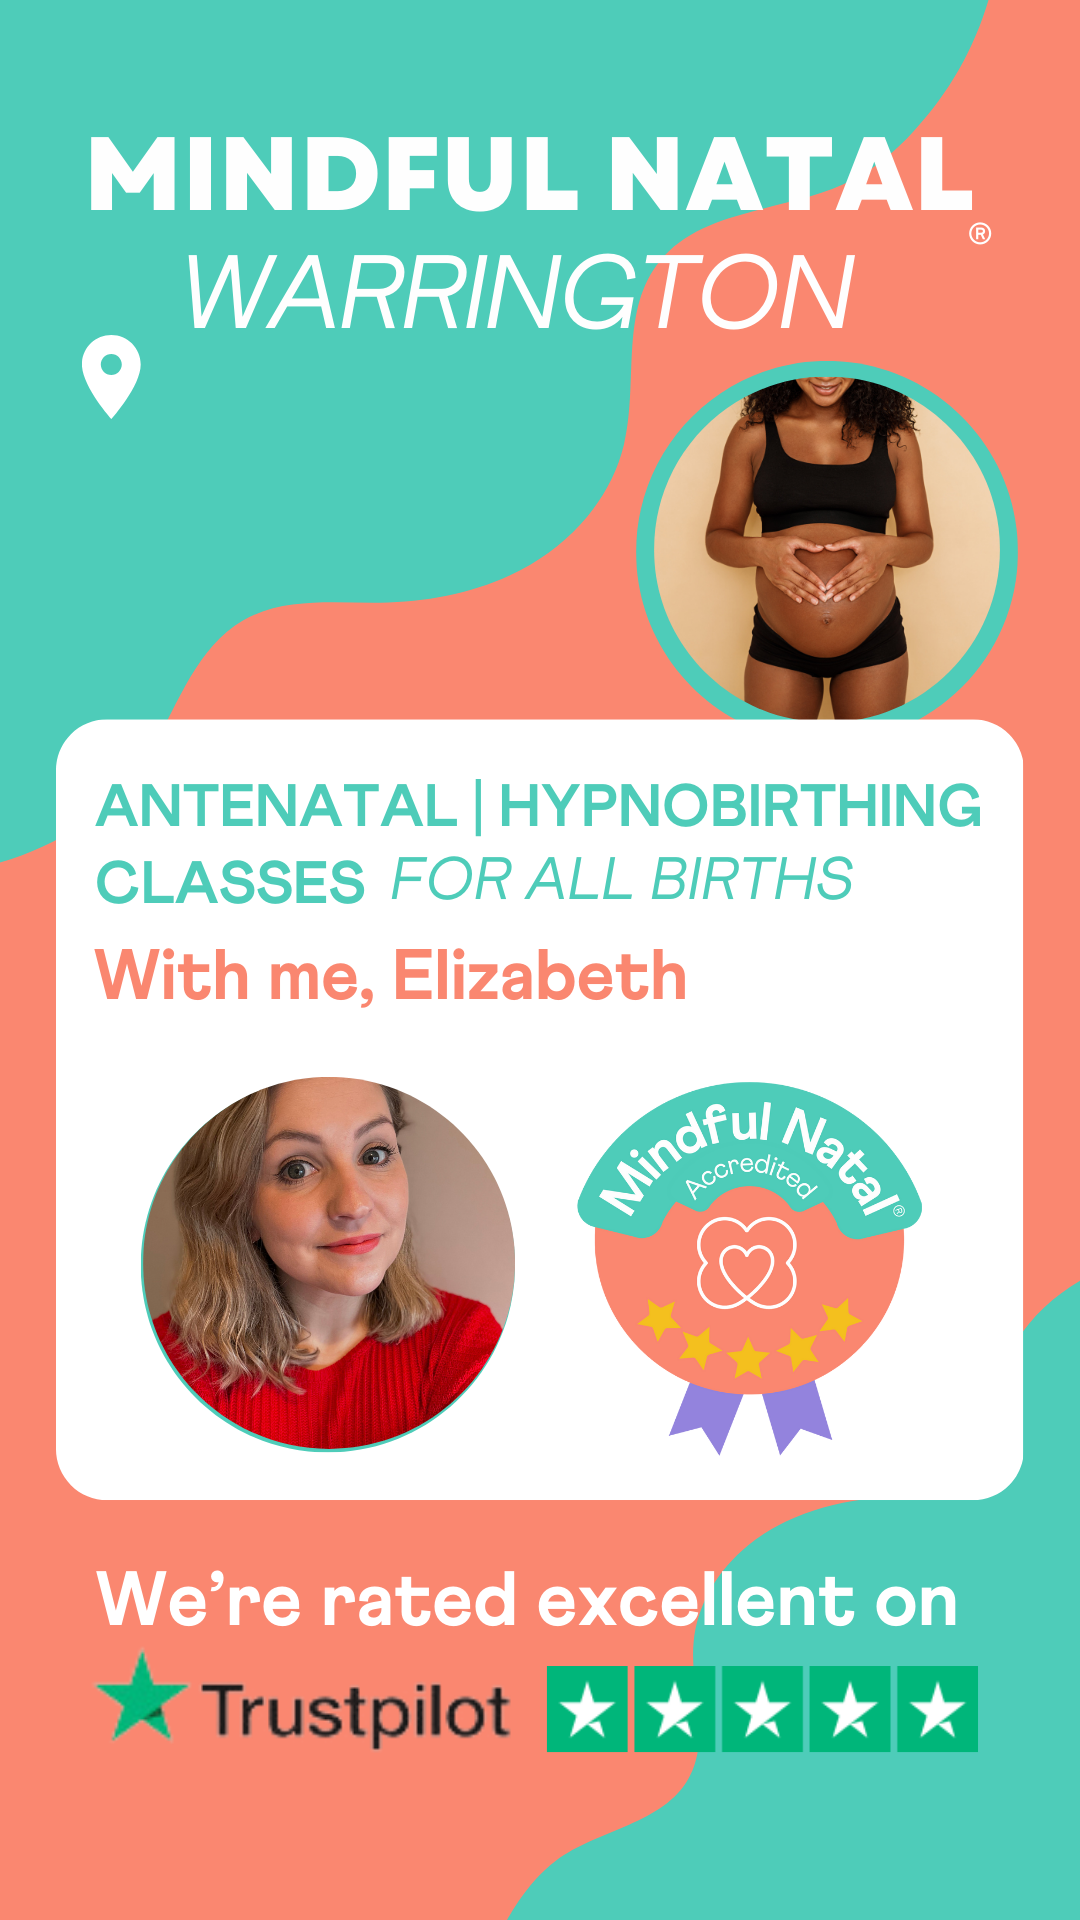 Photo of Mindful Natal® antenatal classes with the Mindful Birth Group